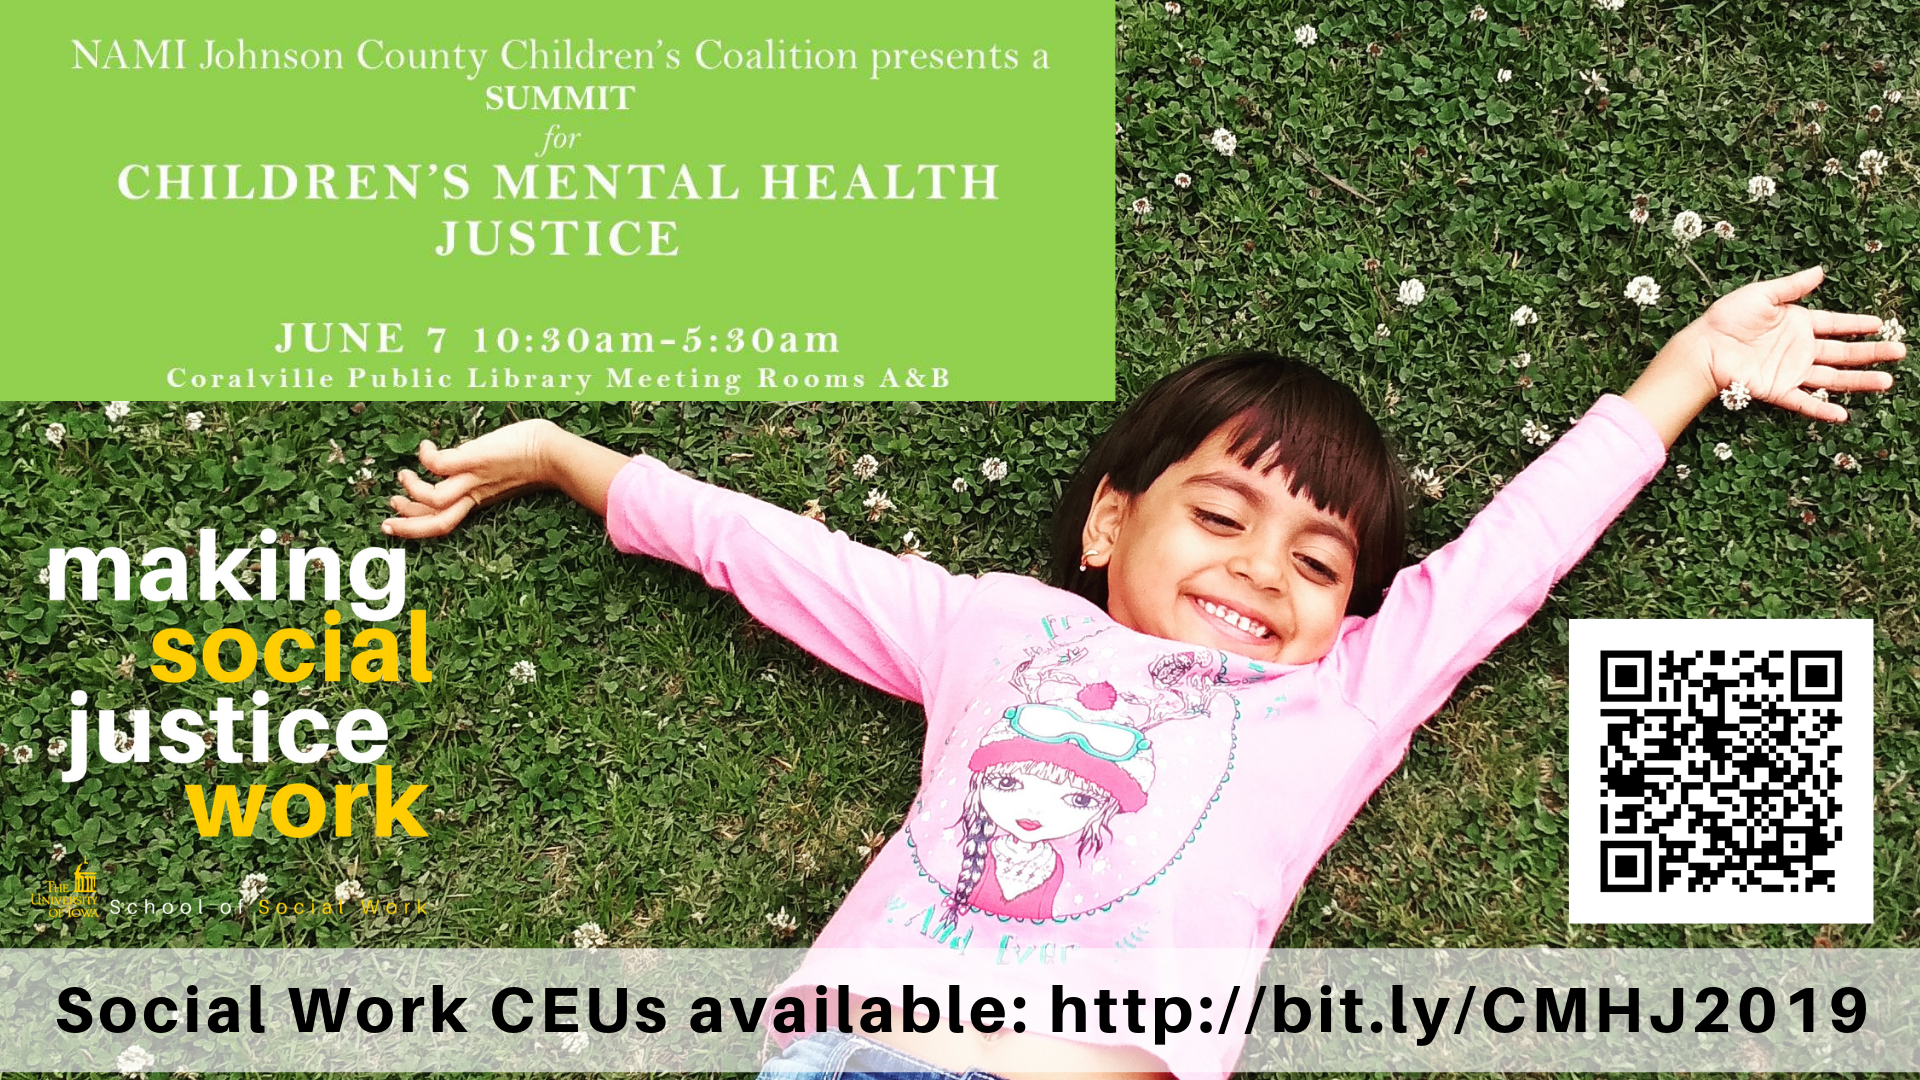 little girl in grass smiling, info about children's mental health justice summit on June 7